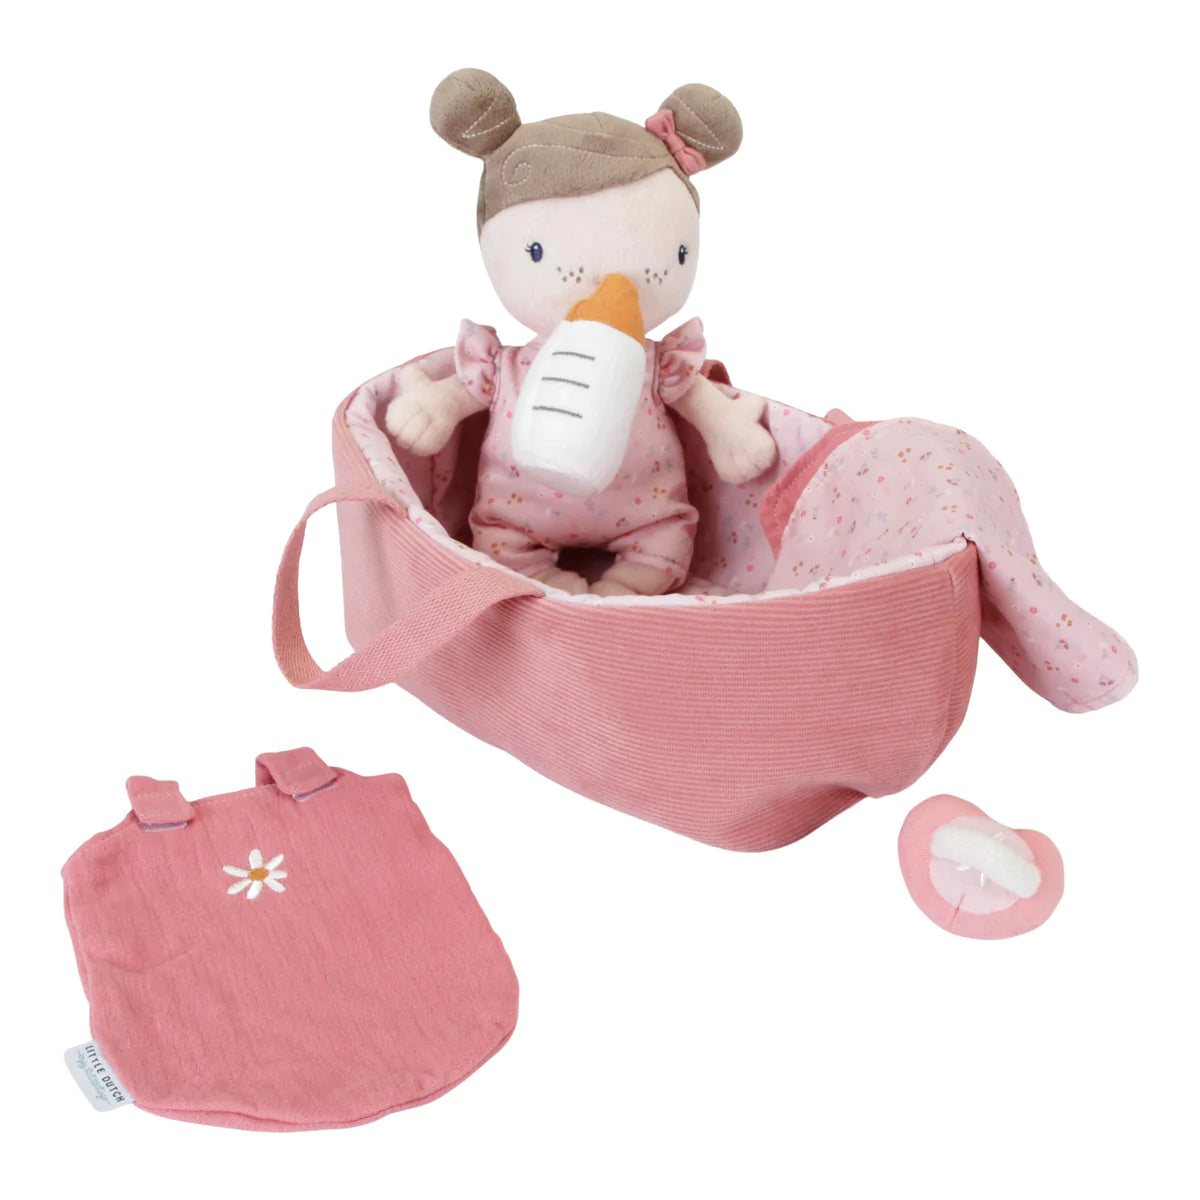 Little Dutch Baby Rosa comes with a bottle, dummy, sleeping bag, blanket, carry cot and an outfit